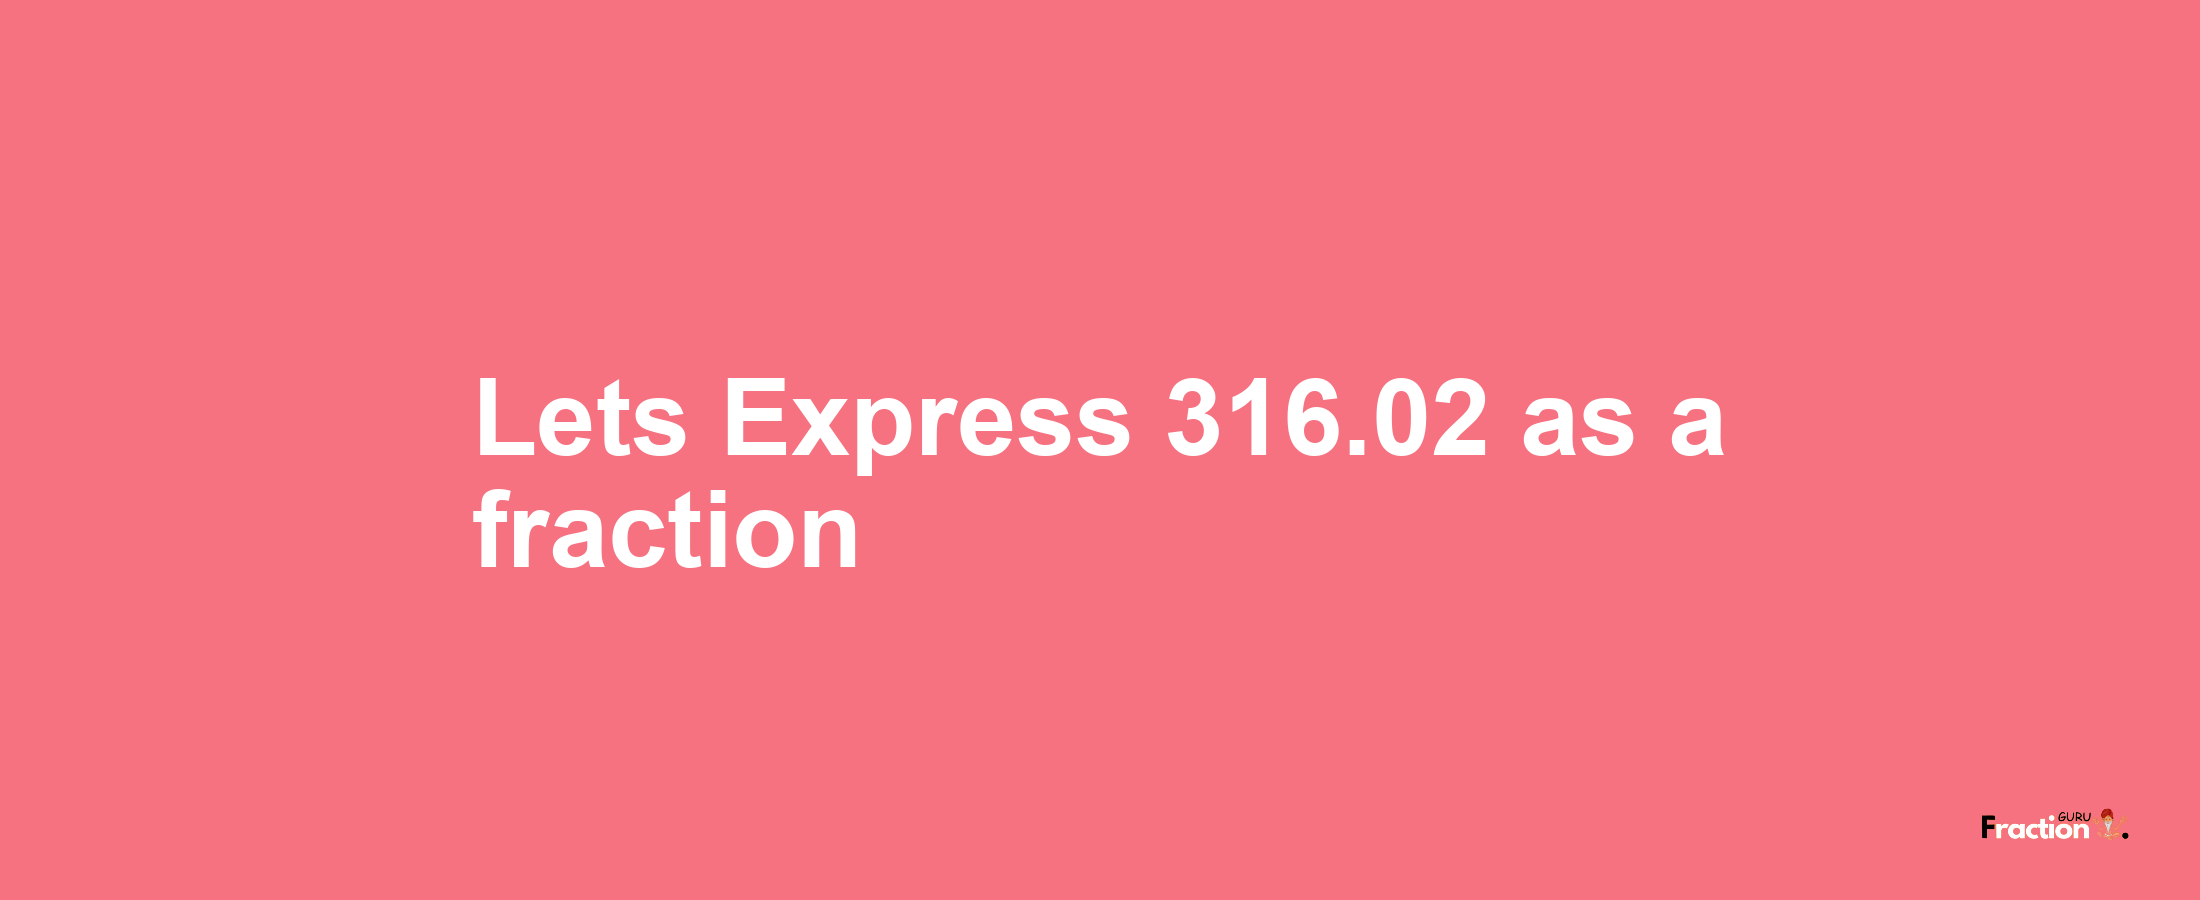 Lets Express 316.02 as afraction